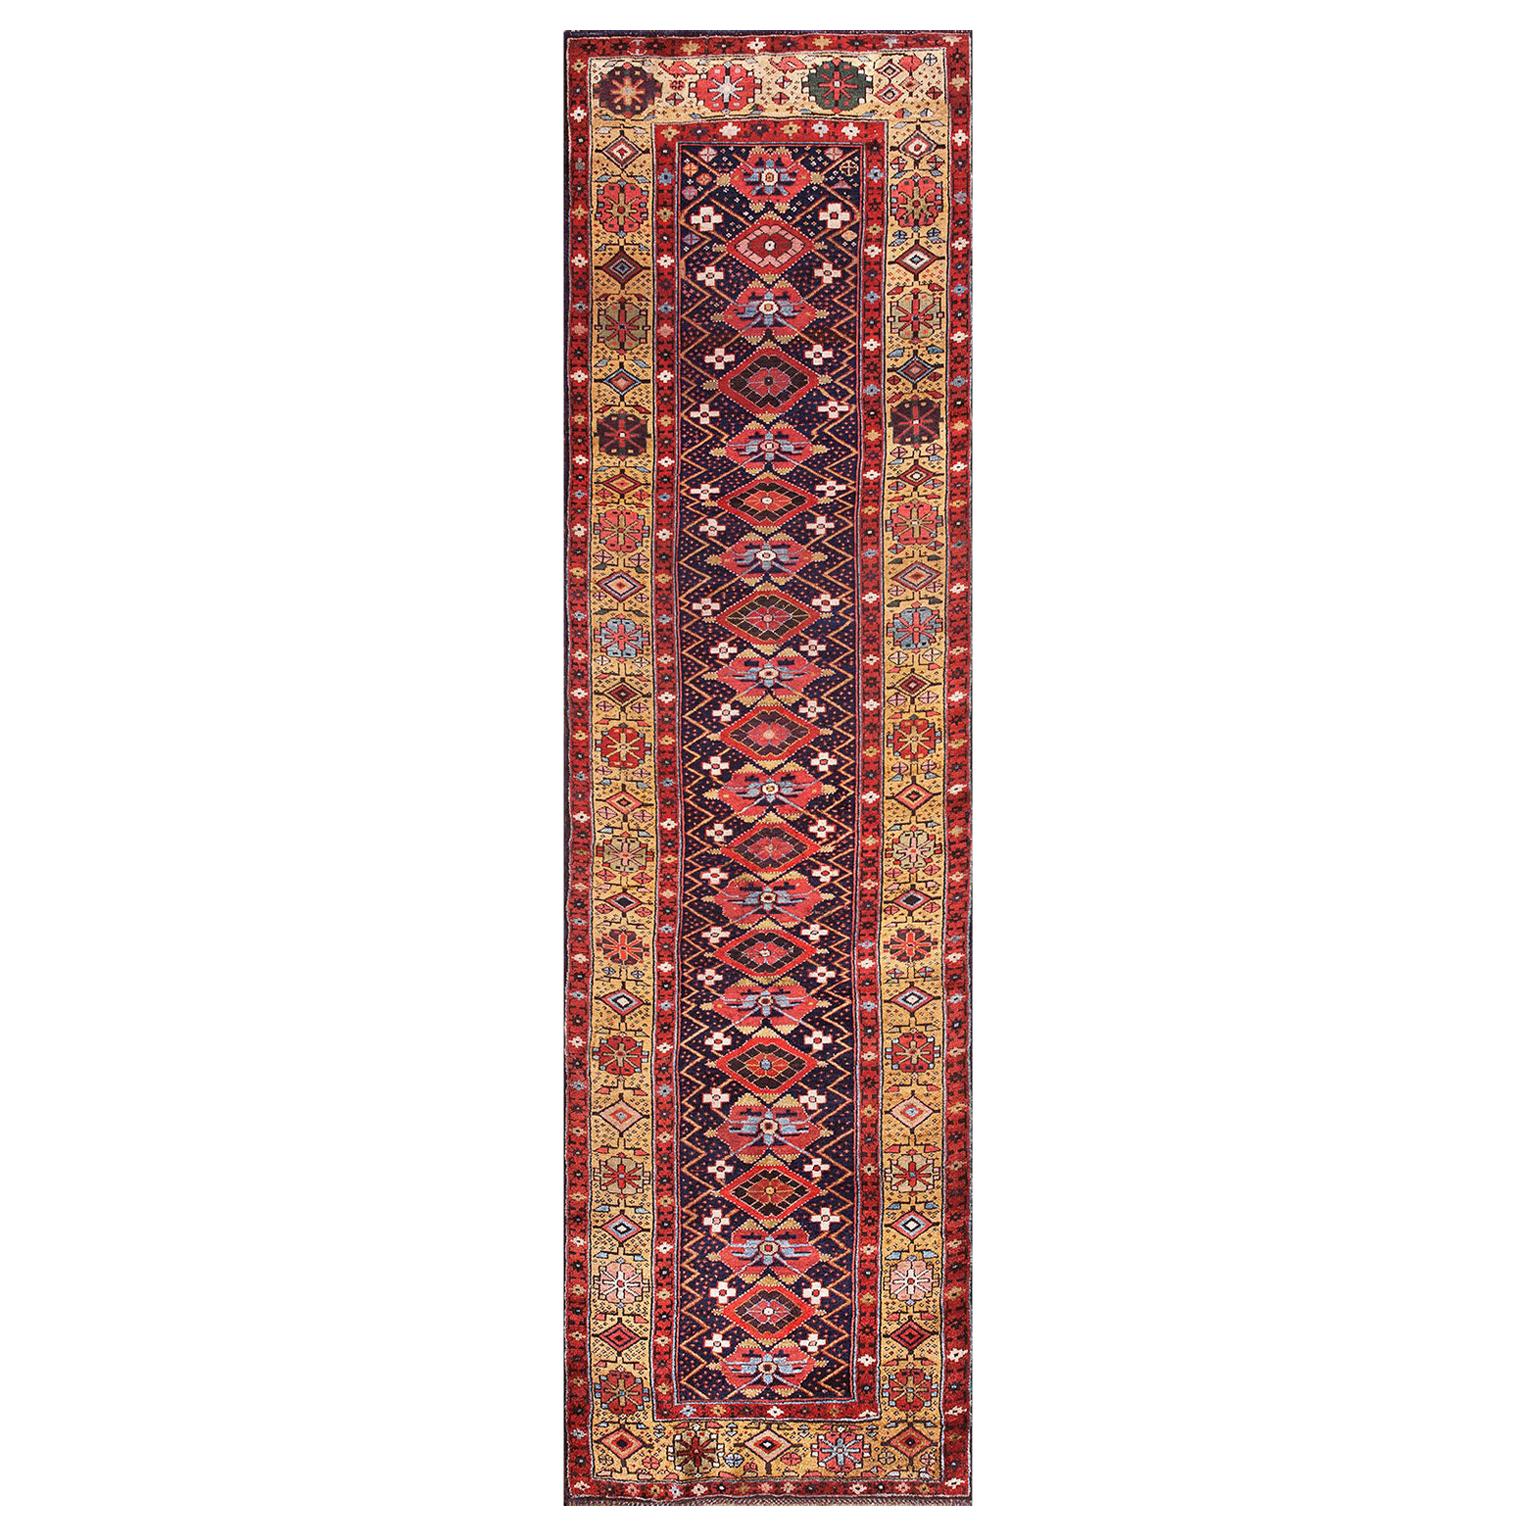 19th Century N.W. Persian Carpet ( 3'9" x 14'4" - 115 x 437 ) For Sale